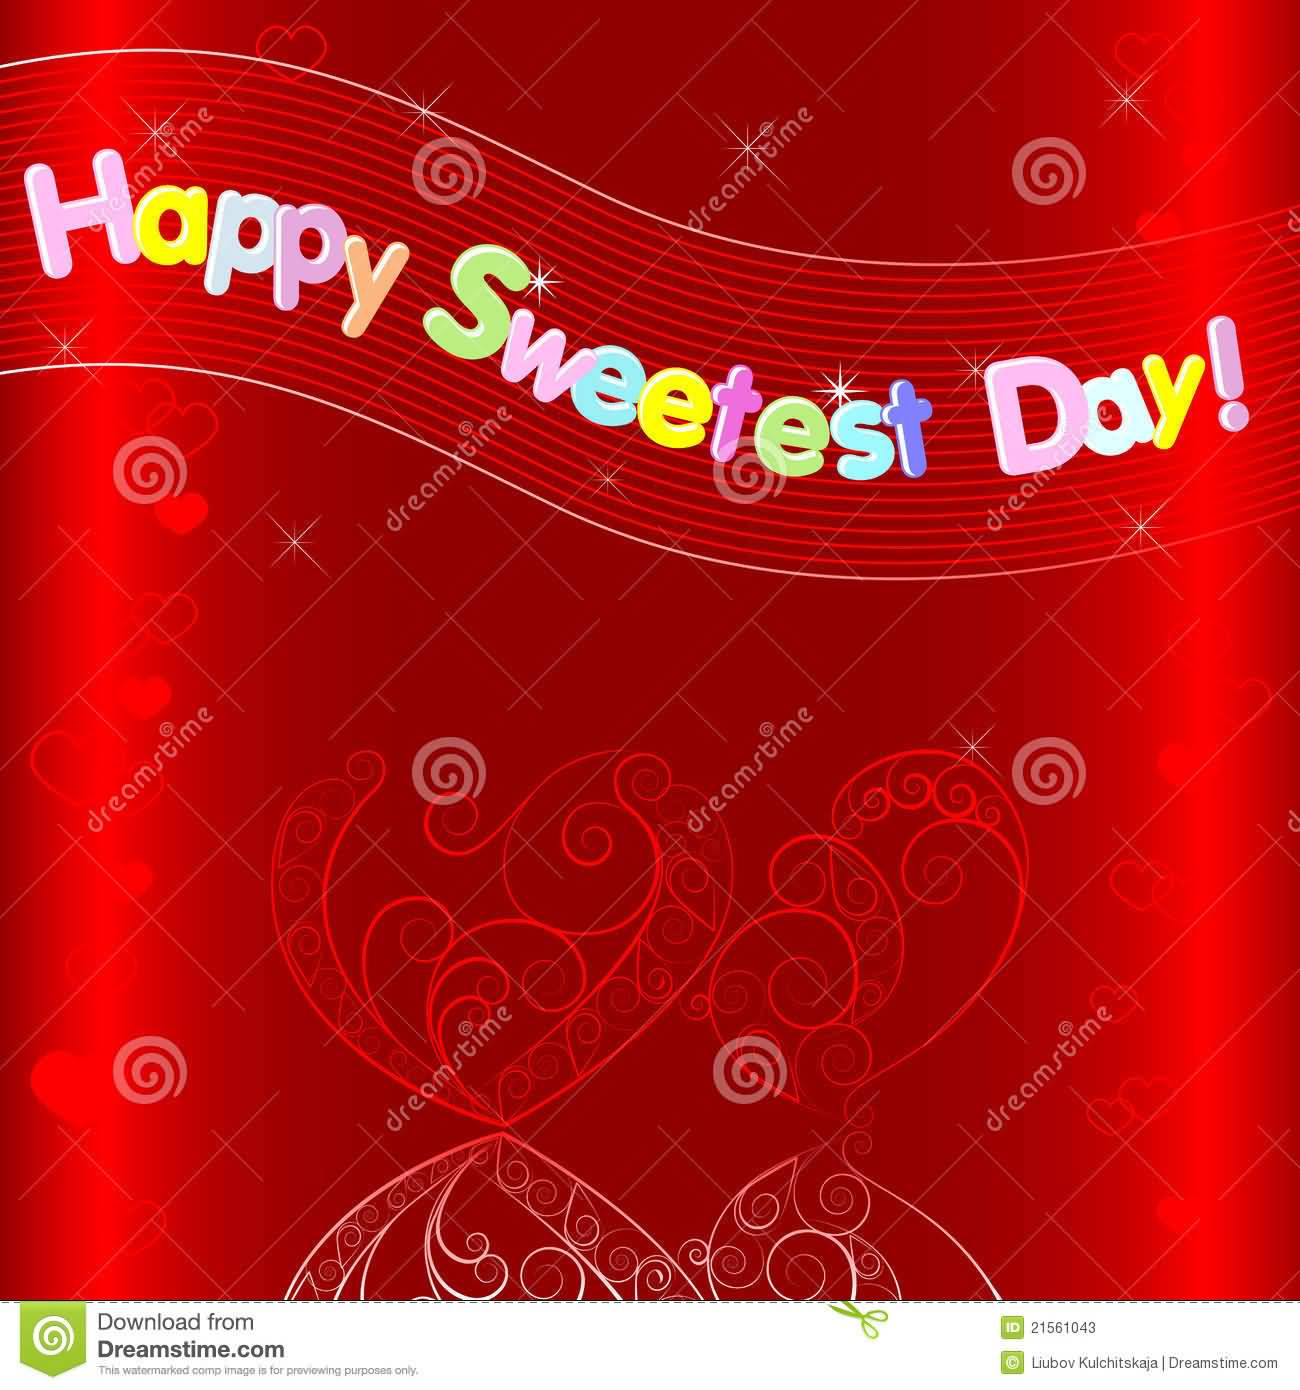 Happy Sweetest Day 2016 Greeting Card